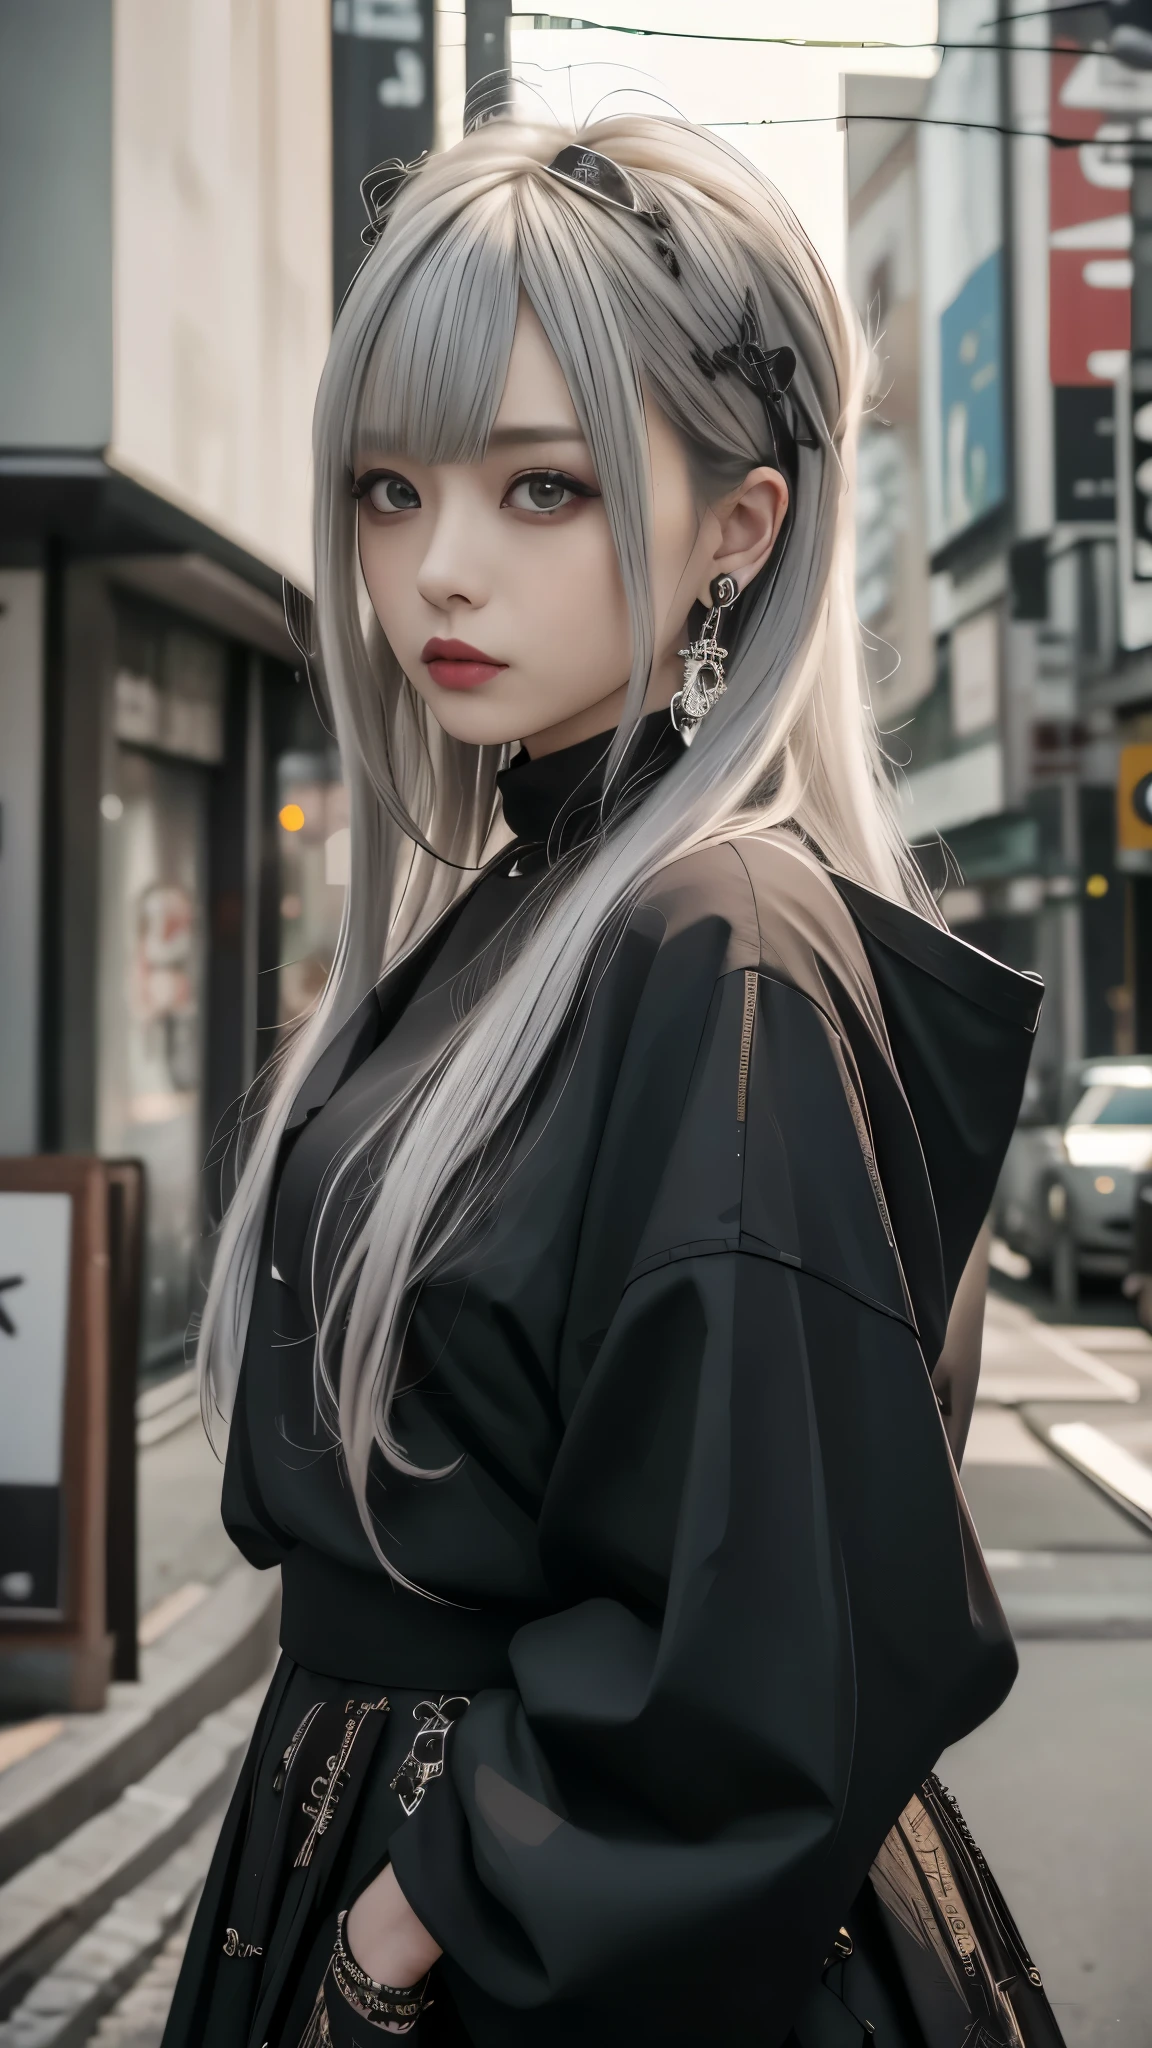 highest quality, masterpiece,Gray Hair, Silver Hair、Golden Eyes,gothic punk costume、look up, Upper Body,Hair bundle,Fair skin,(Realism:1.5、Realistic、Photorealistic)、black、Earrings、amount、Gothic Skirt、Goth_punk, One Woman、独奏, ((Midnight、Neon Town)), Look at the viewers, Cute face、Portraiture, Side Lock、masterpiece、highest quality、Highest quality、Highest Resolution、Super detailed、Ultra-compact、Realistic textured face and body、Smaller breasts:1.3、Small waist、Deep red lipstick、Swollen eyes、Red eyeshadow、Dynamic Pose、Degrees of Freedom:1.8、squat、Leaning forward、